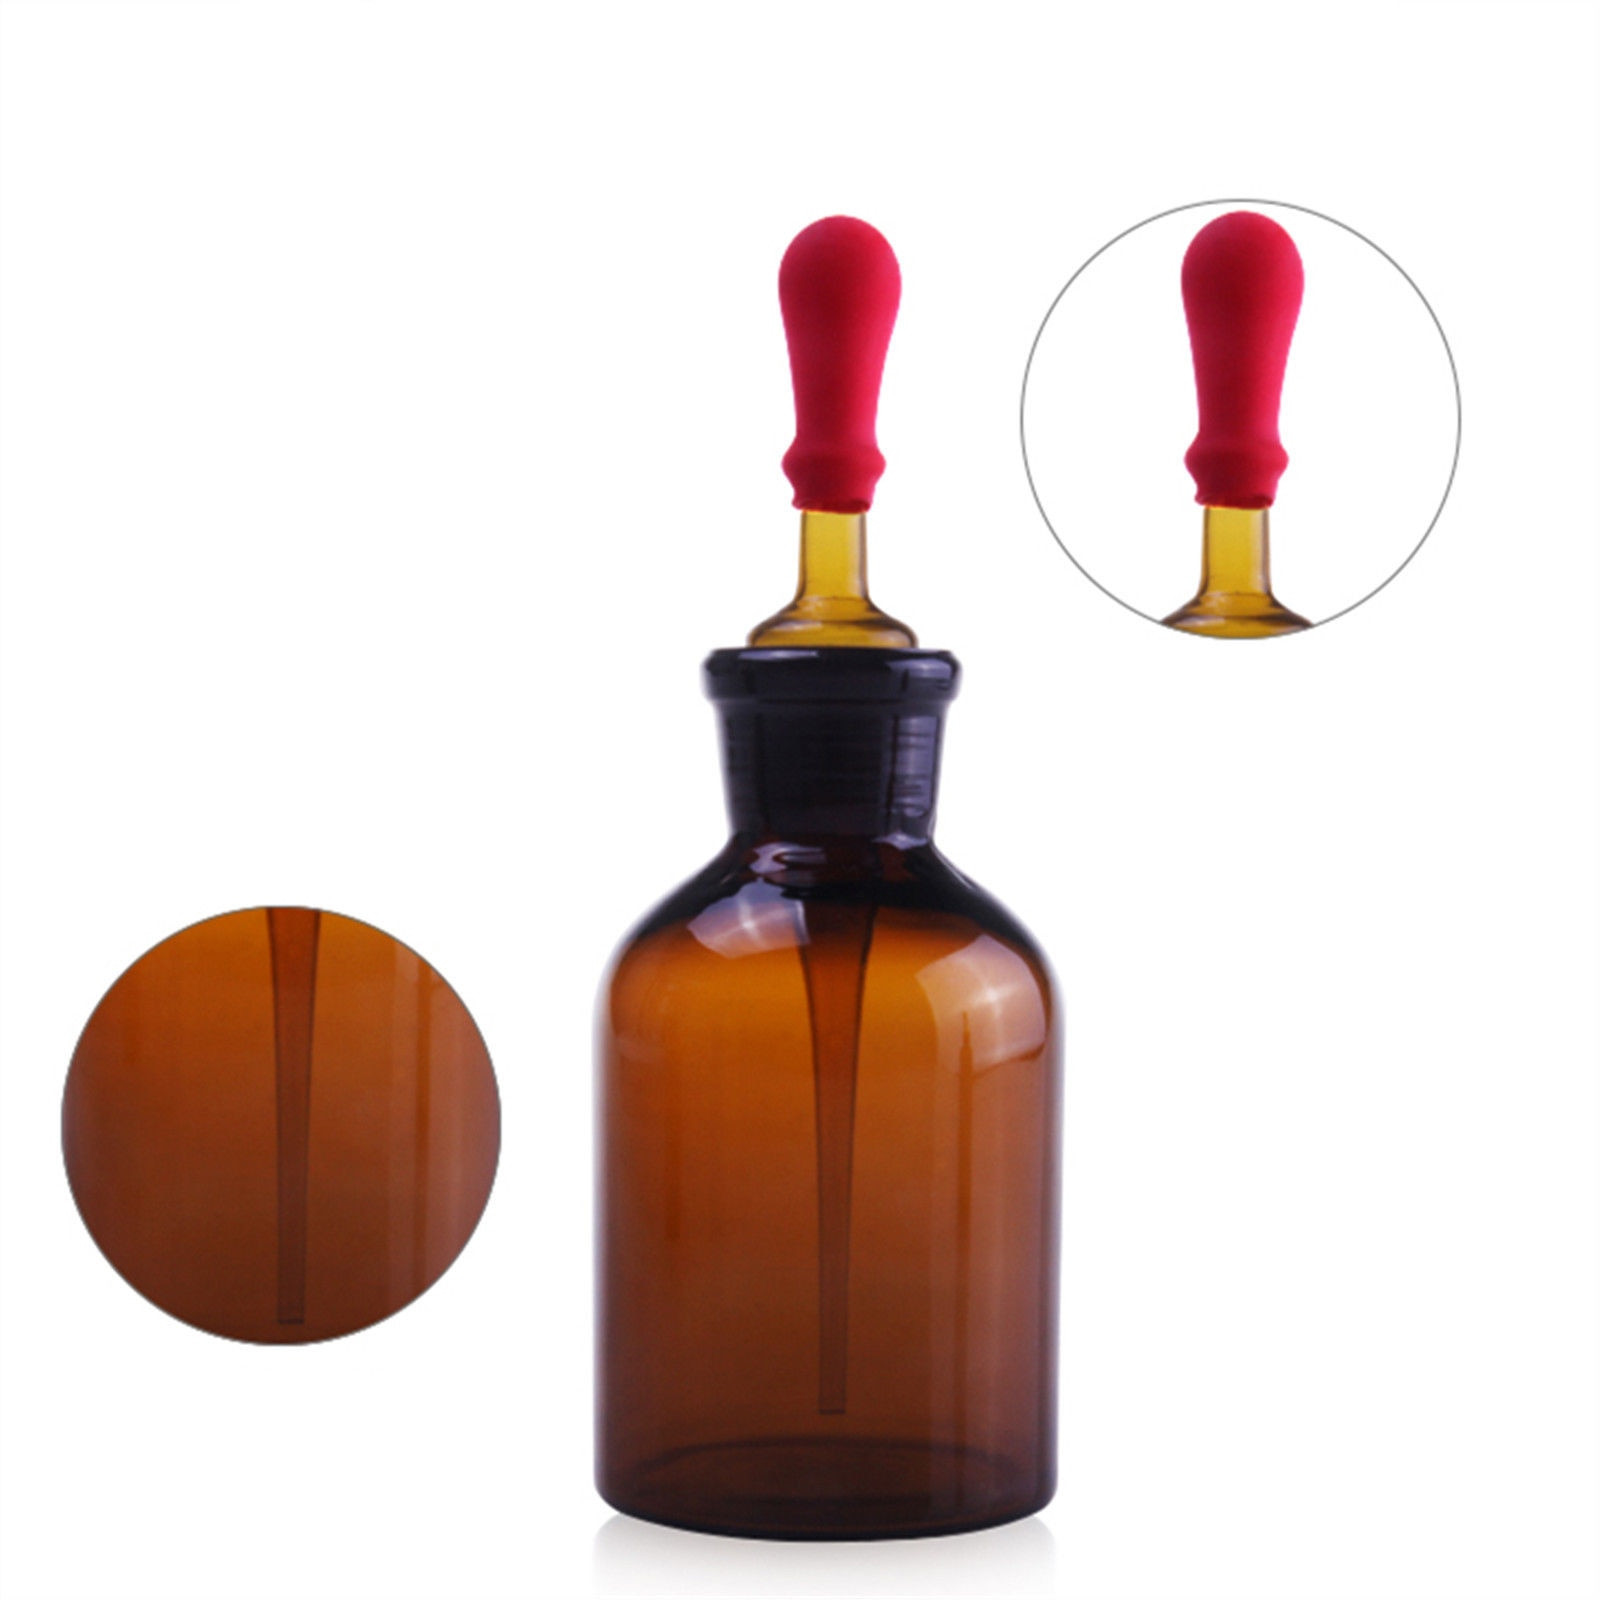 brown glass bottle vase of aliexpress com buy 125ml glass amber dropper bottle drop reagent for aliexpress com buy 125ml glass amber dropper bottle drop reagent flask lab chemistry glassware from reliable chemistry glassware suppliers on deschem